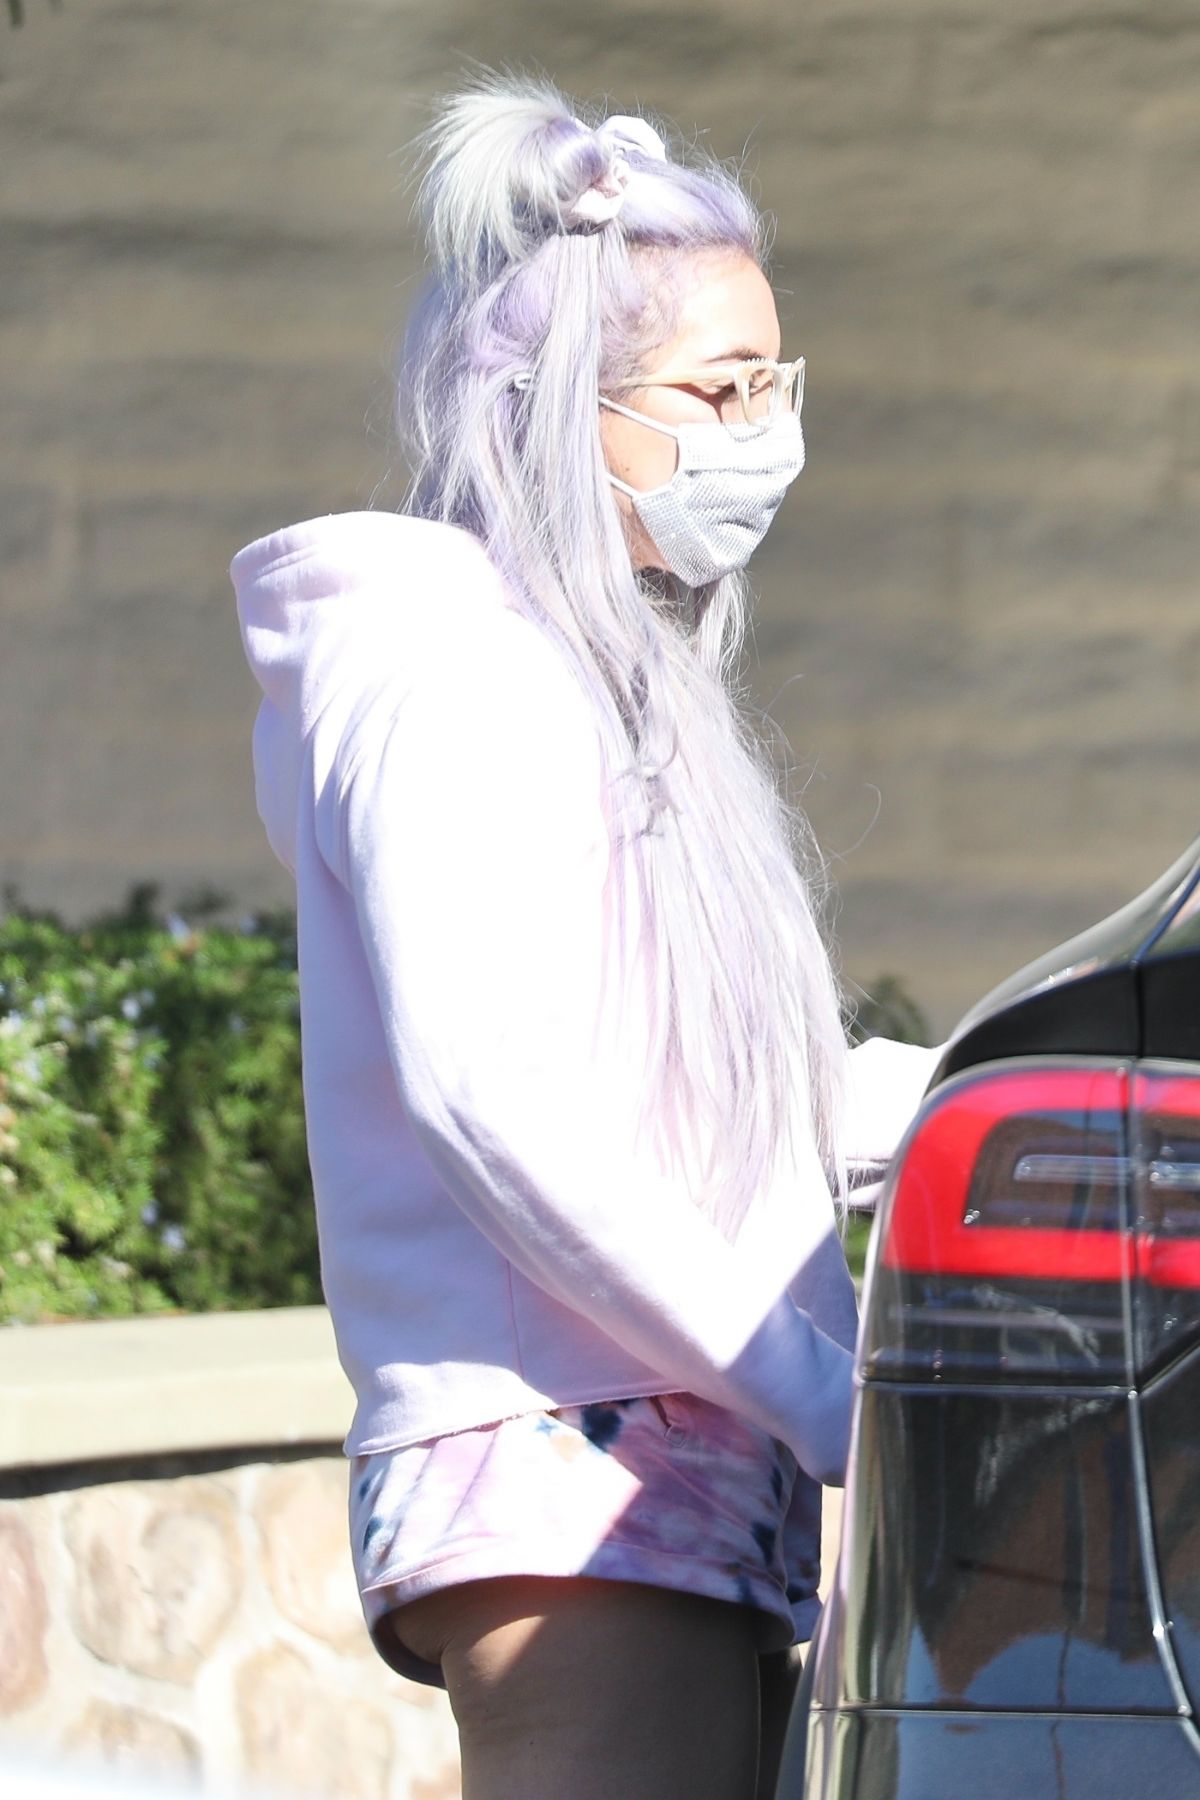 lady-gaga-out-for-groceries-shopping-in-malibu-12-31-2020-1.jpg